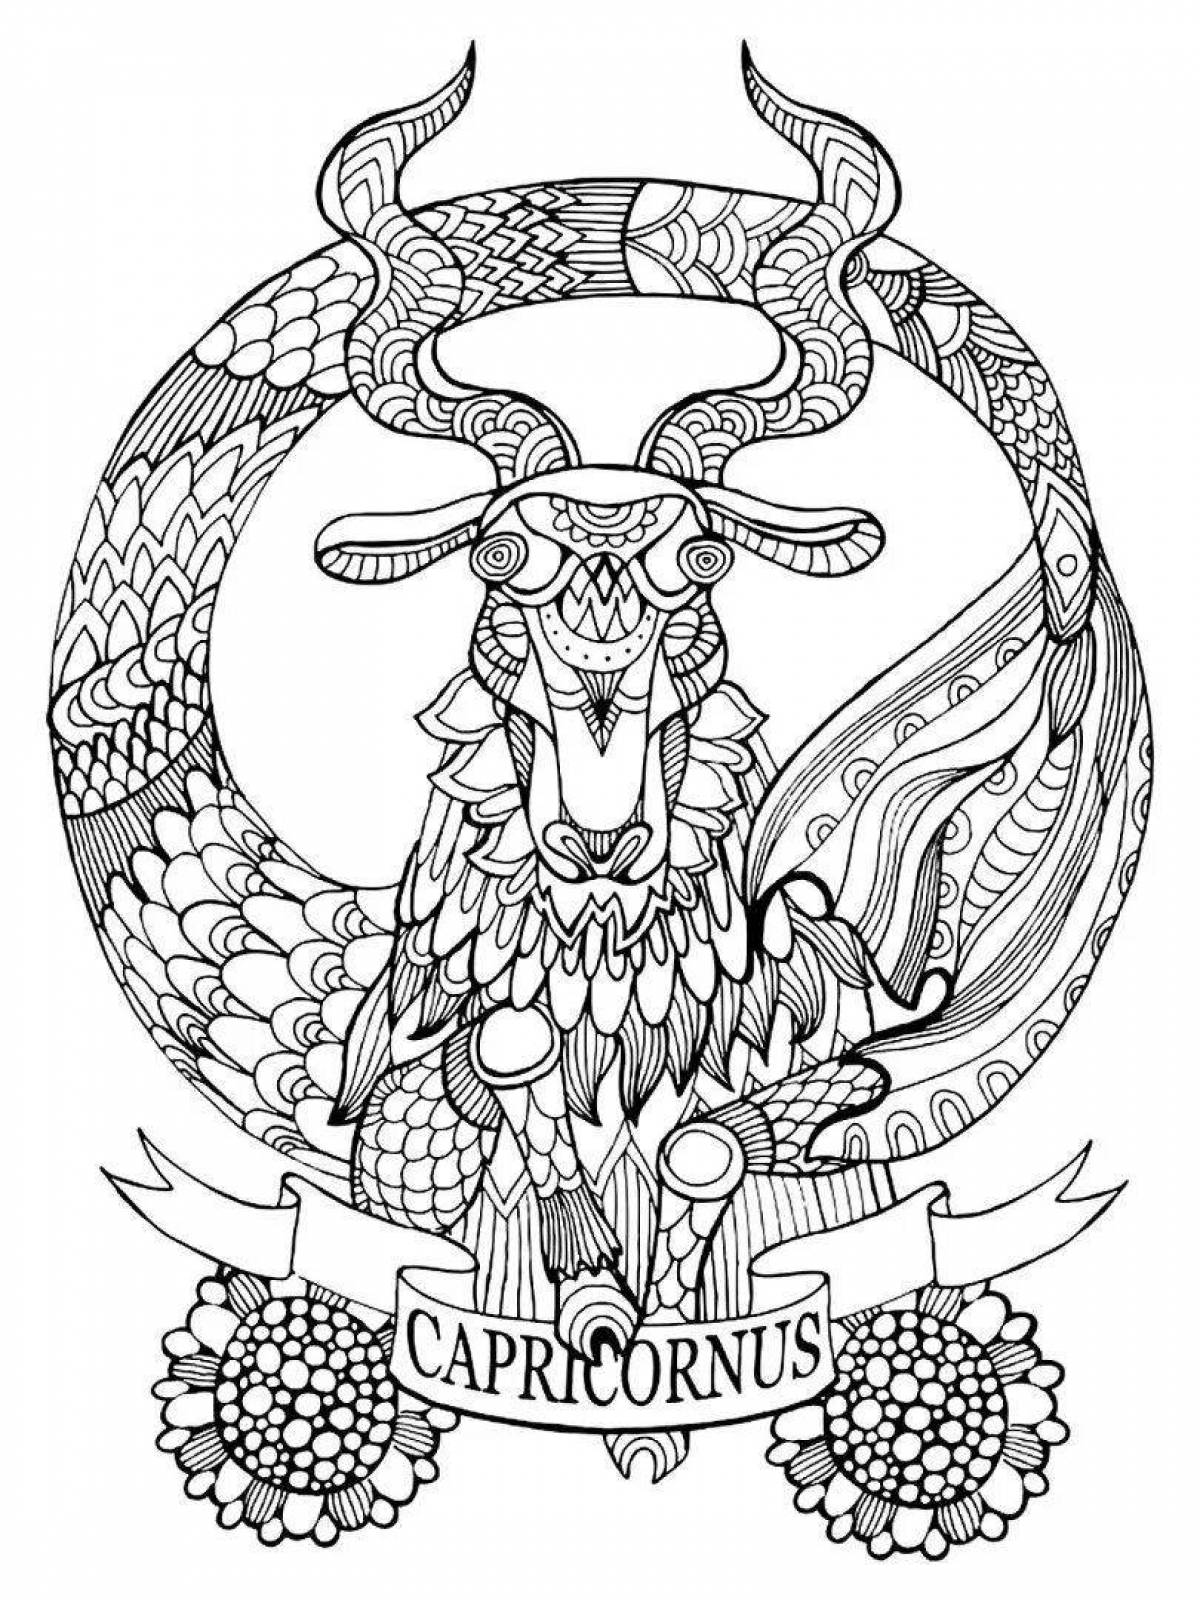 Animated capricorn coloring page